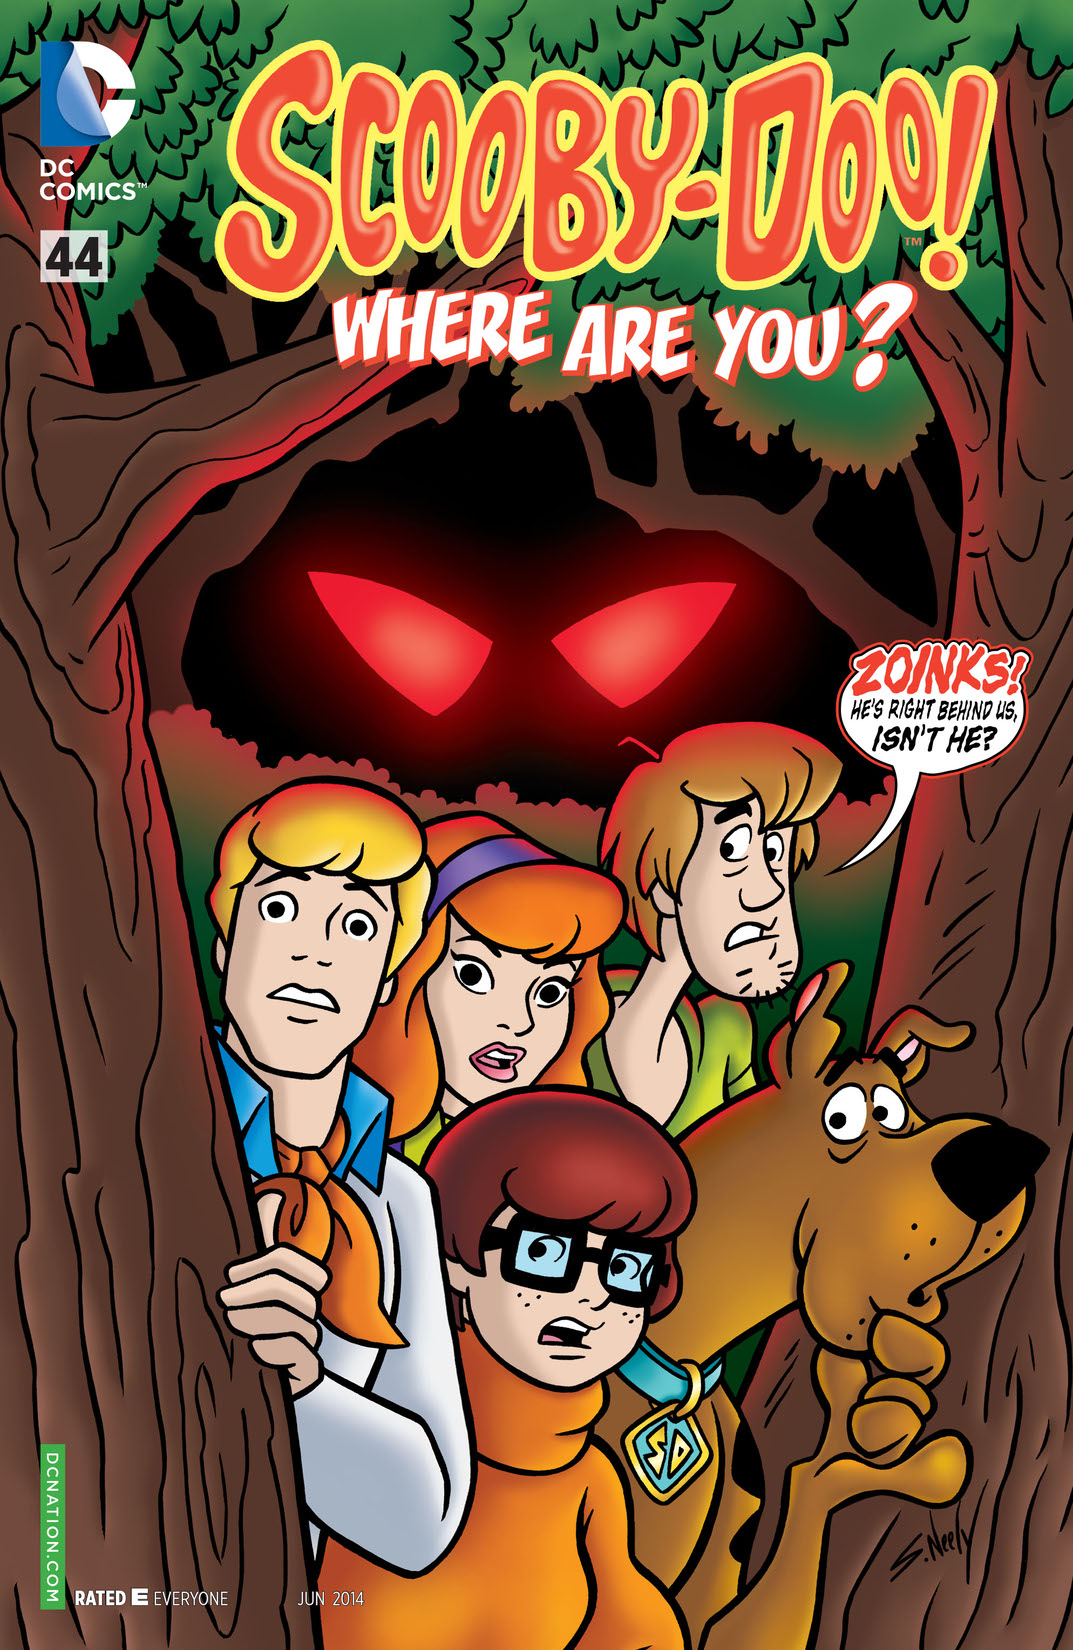 Scooby-Doo, Where Are You? #44 preview images